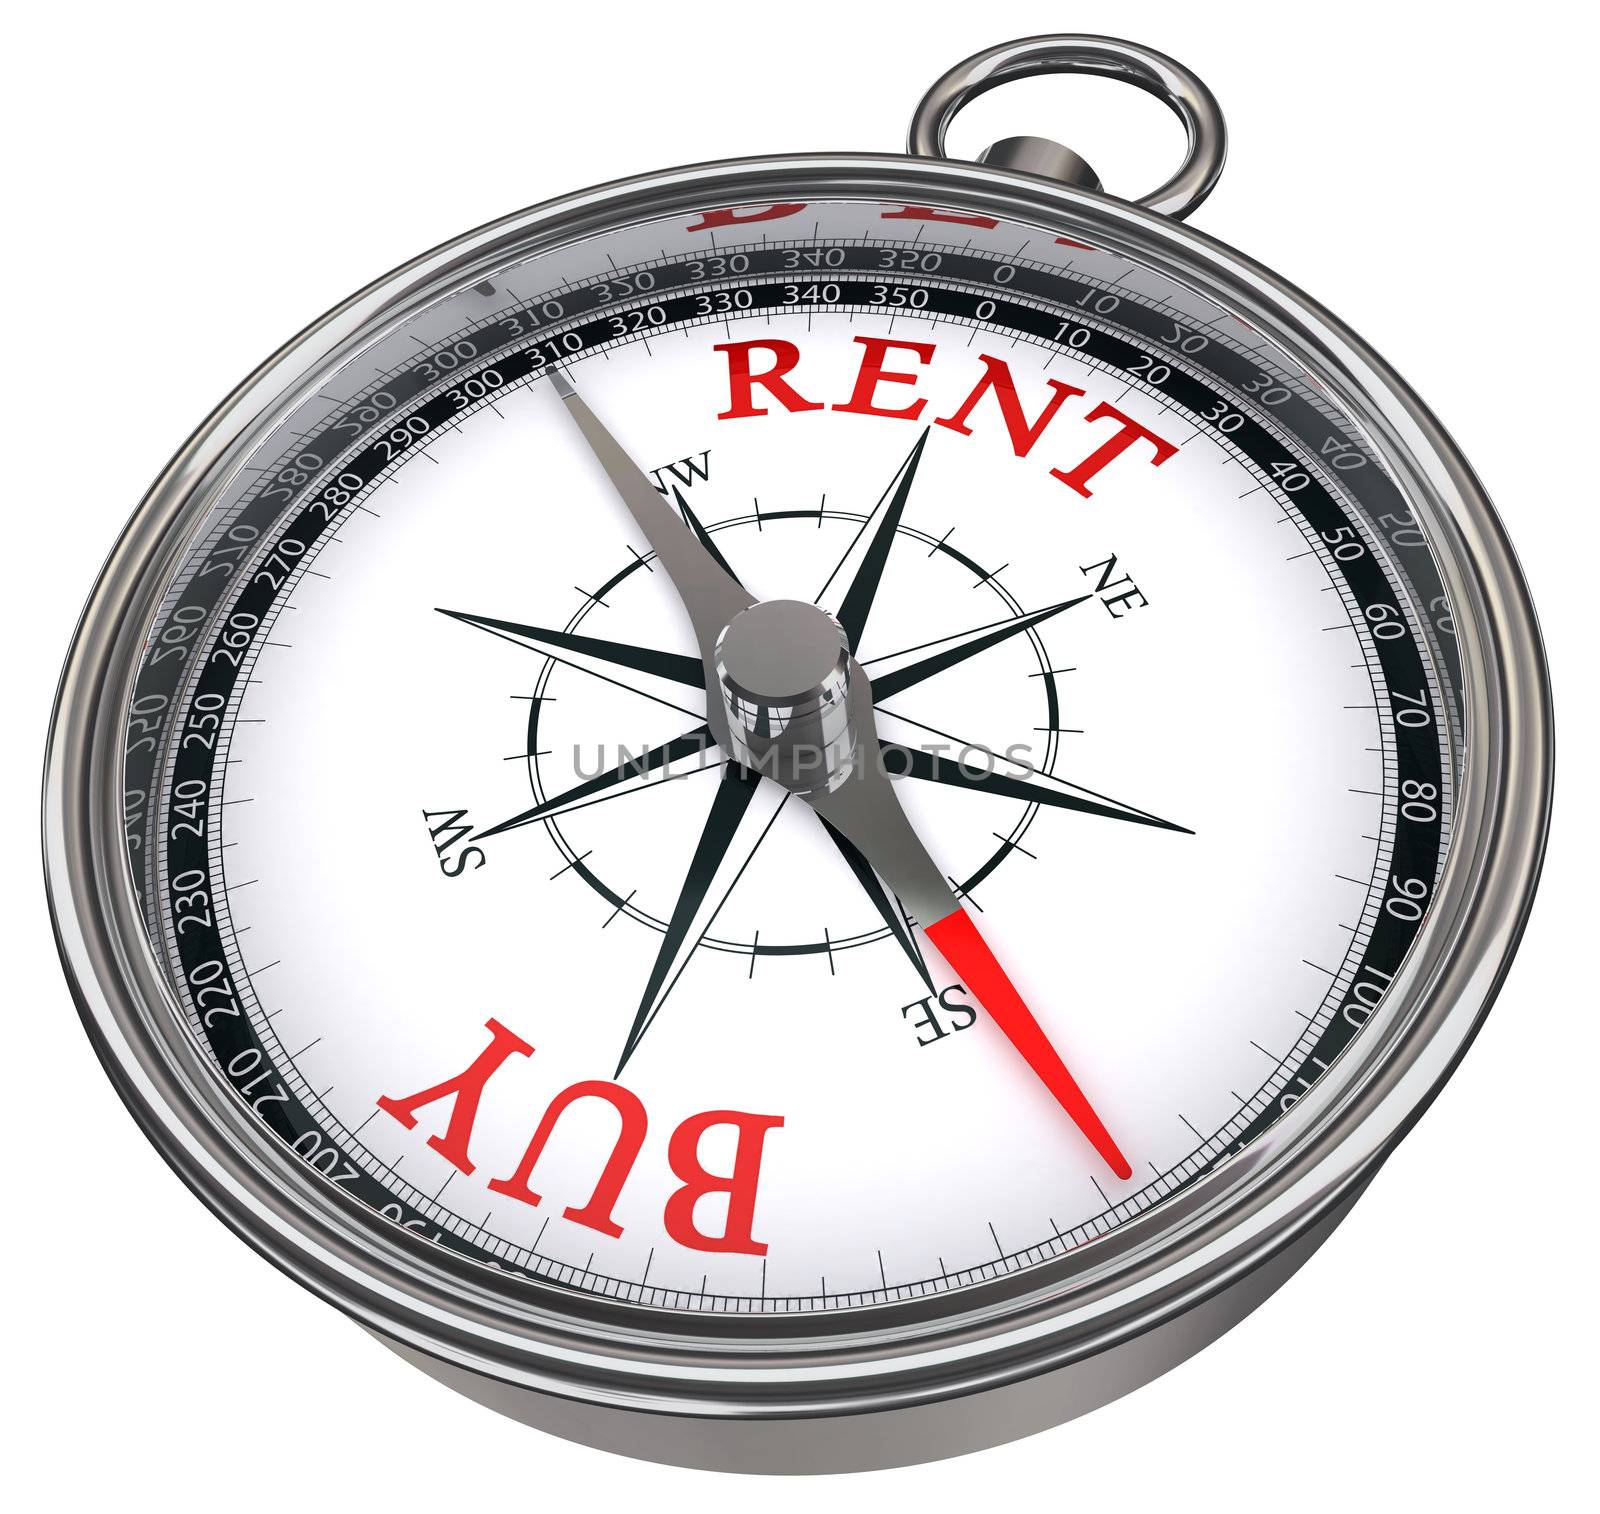 buy versus rent concept compass isolated on white background